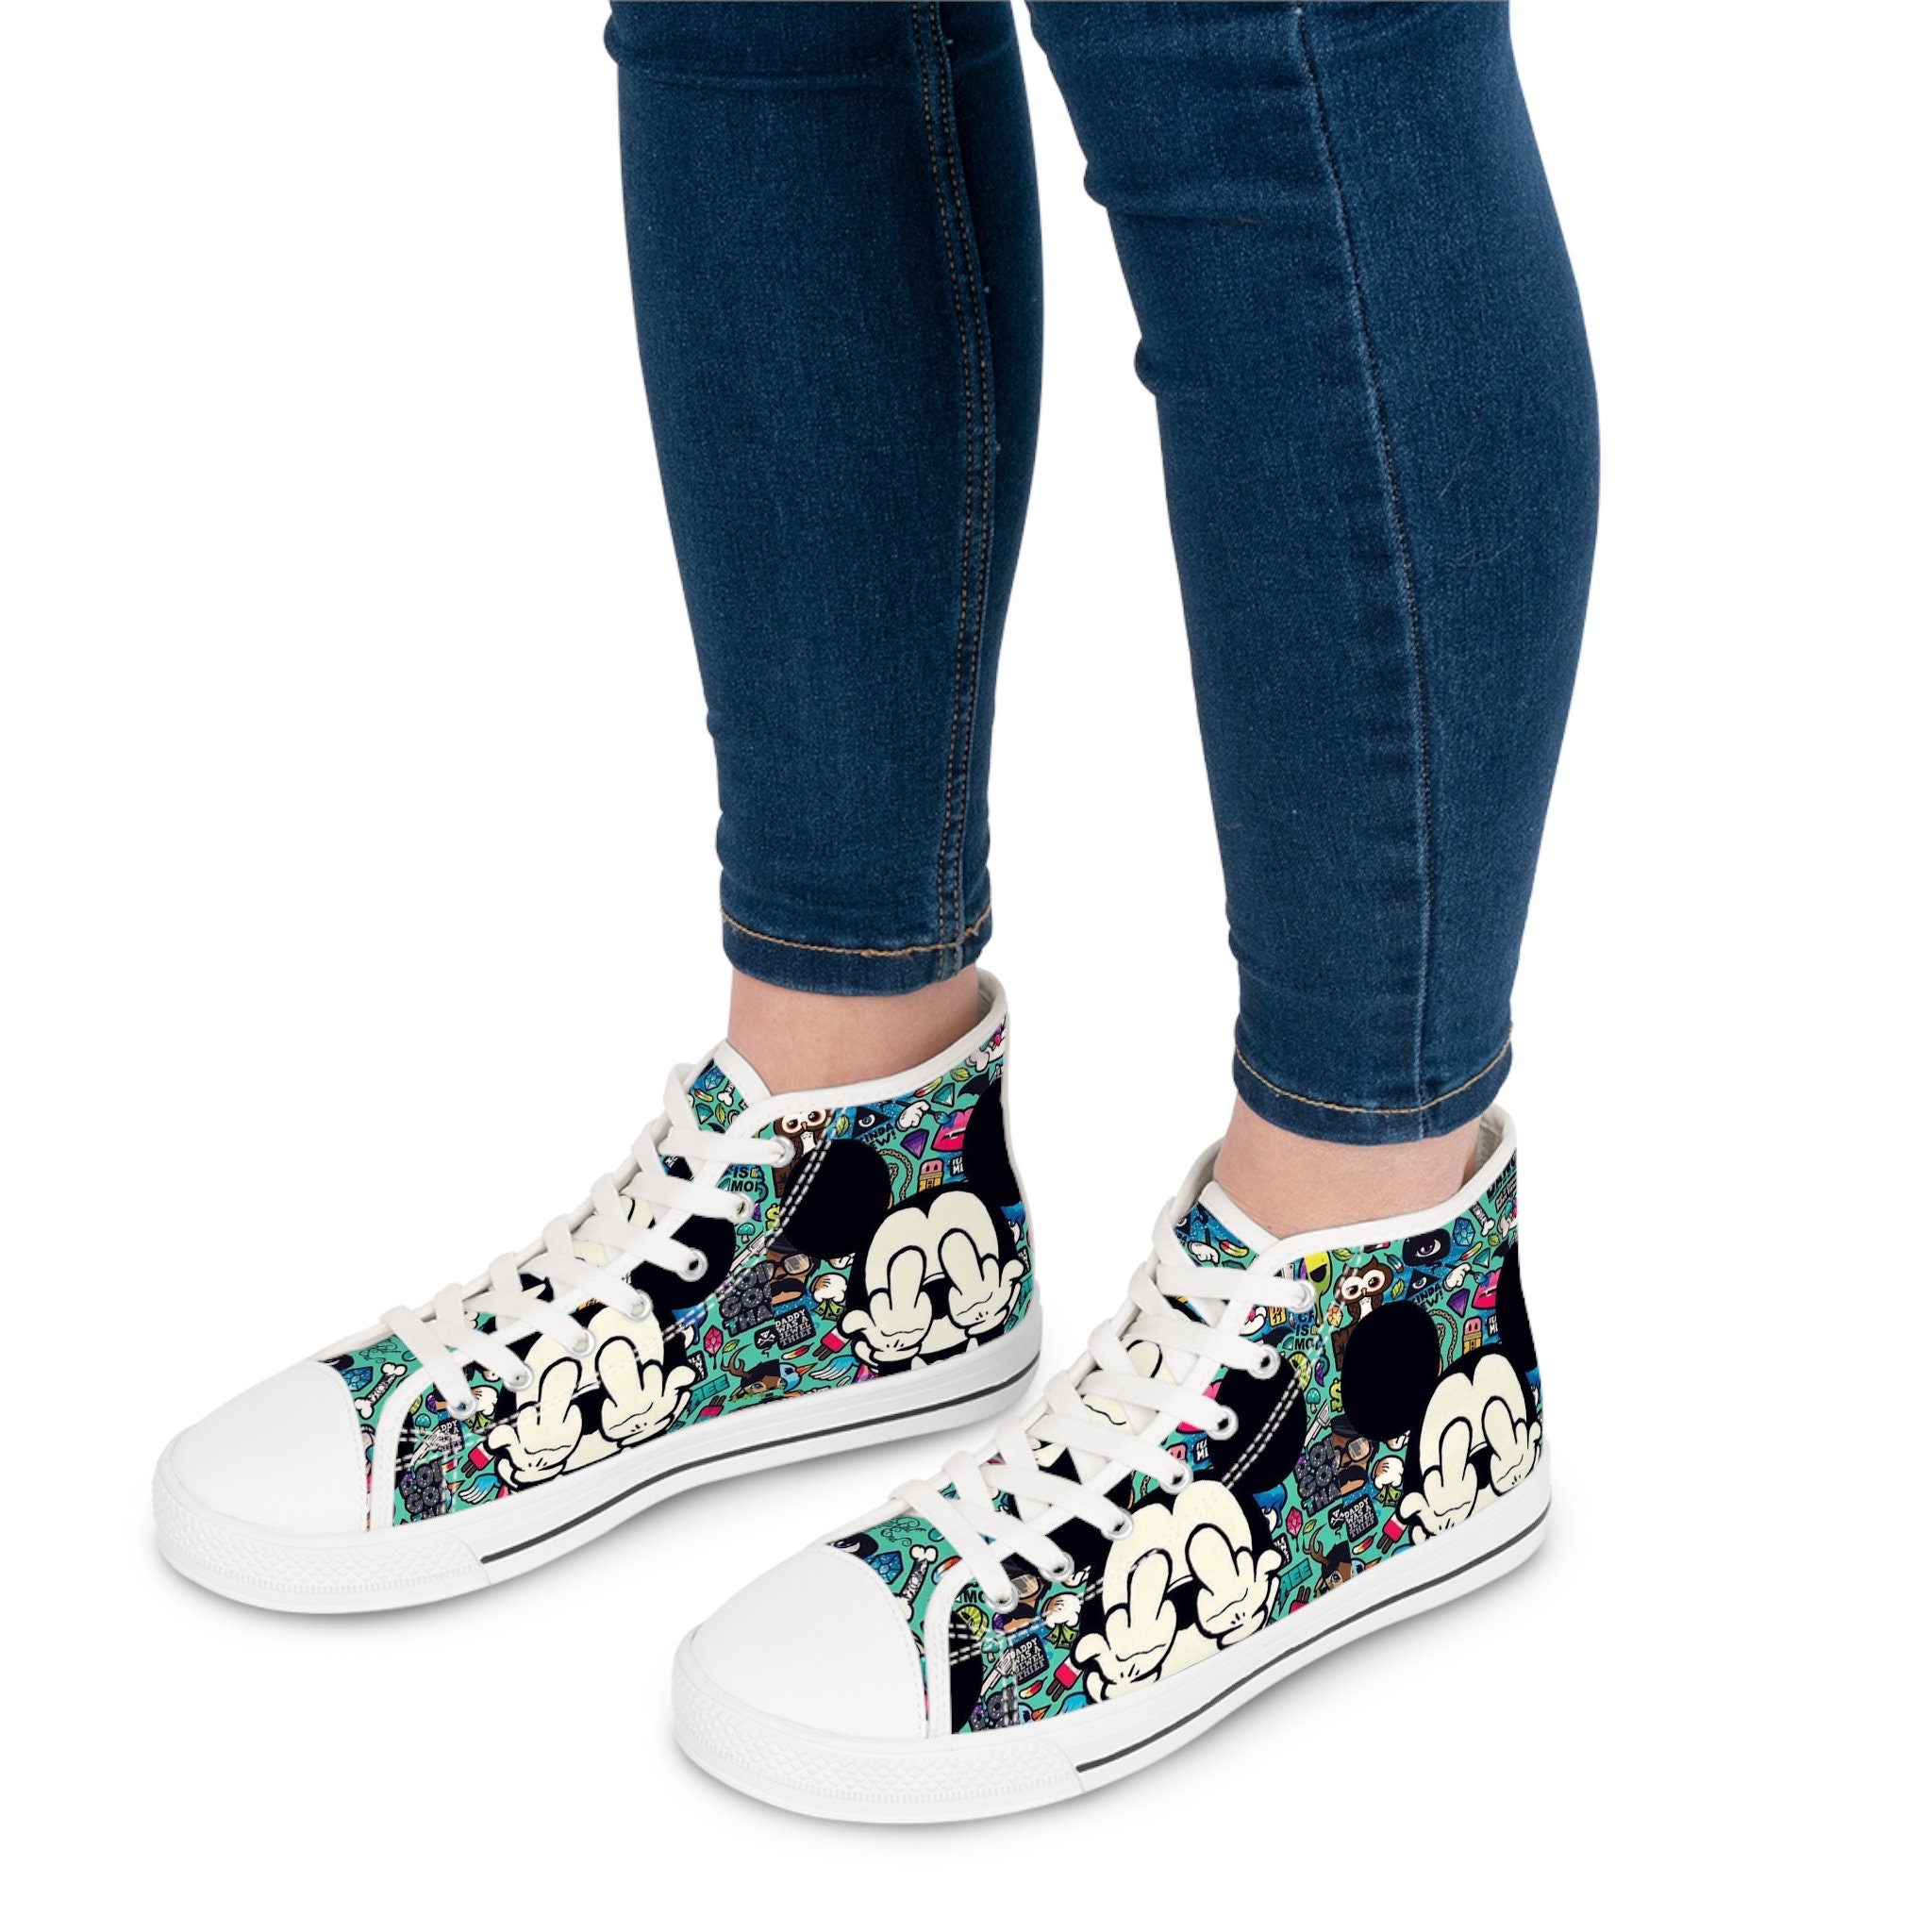 Mickey mouse cartoon Women's High Top Sneakers